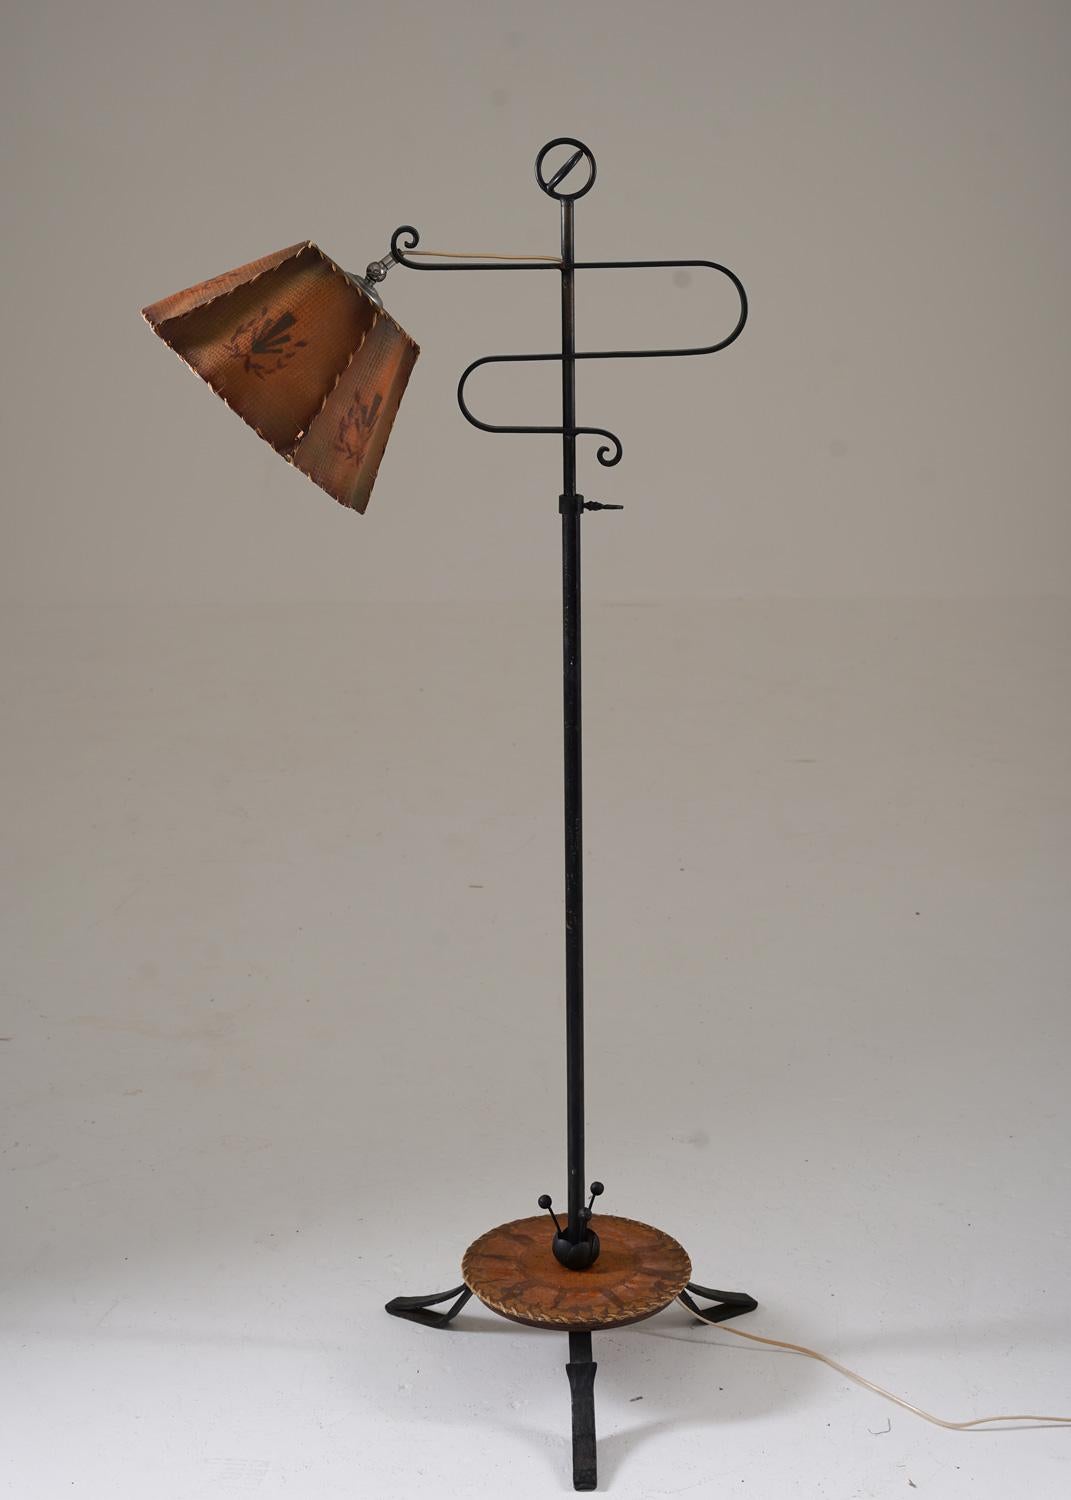 Lovely hand forged floor lamp manufactured in Sweden, 1930s.
This type of lamp is commonly seen in old interiors with Axel Einar Hjort's cabin furniture.
The lamp consists of a black iron base with nice details and a few minimalistic ornaments. The